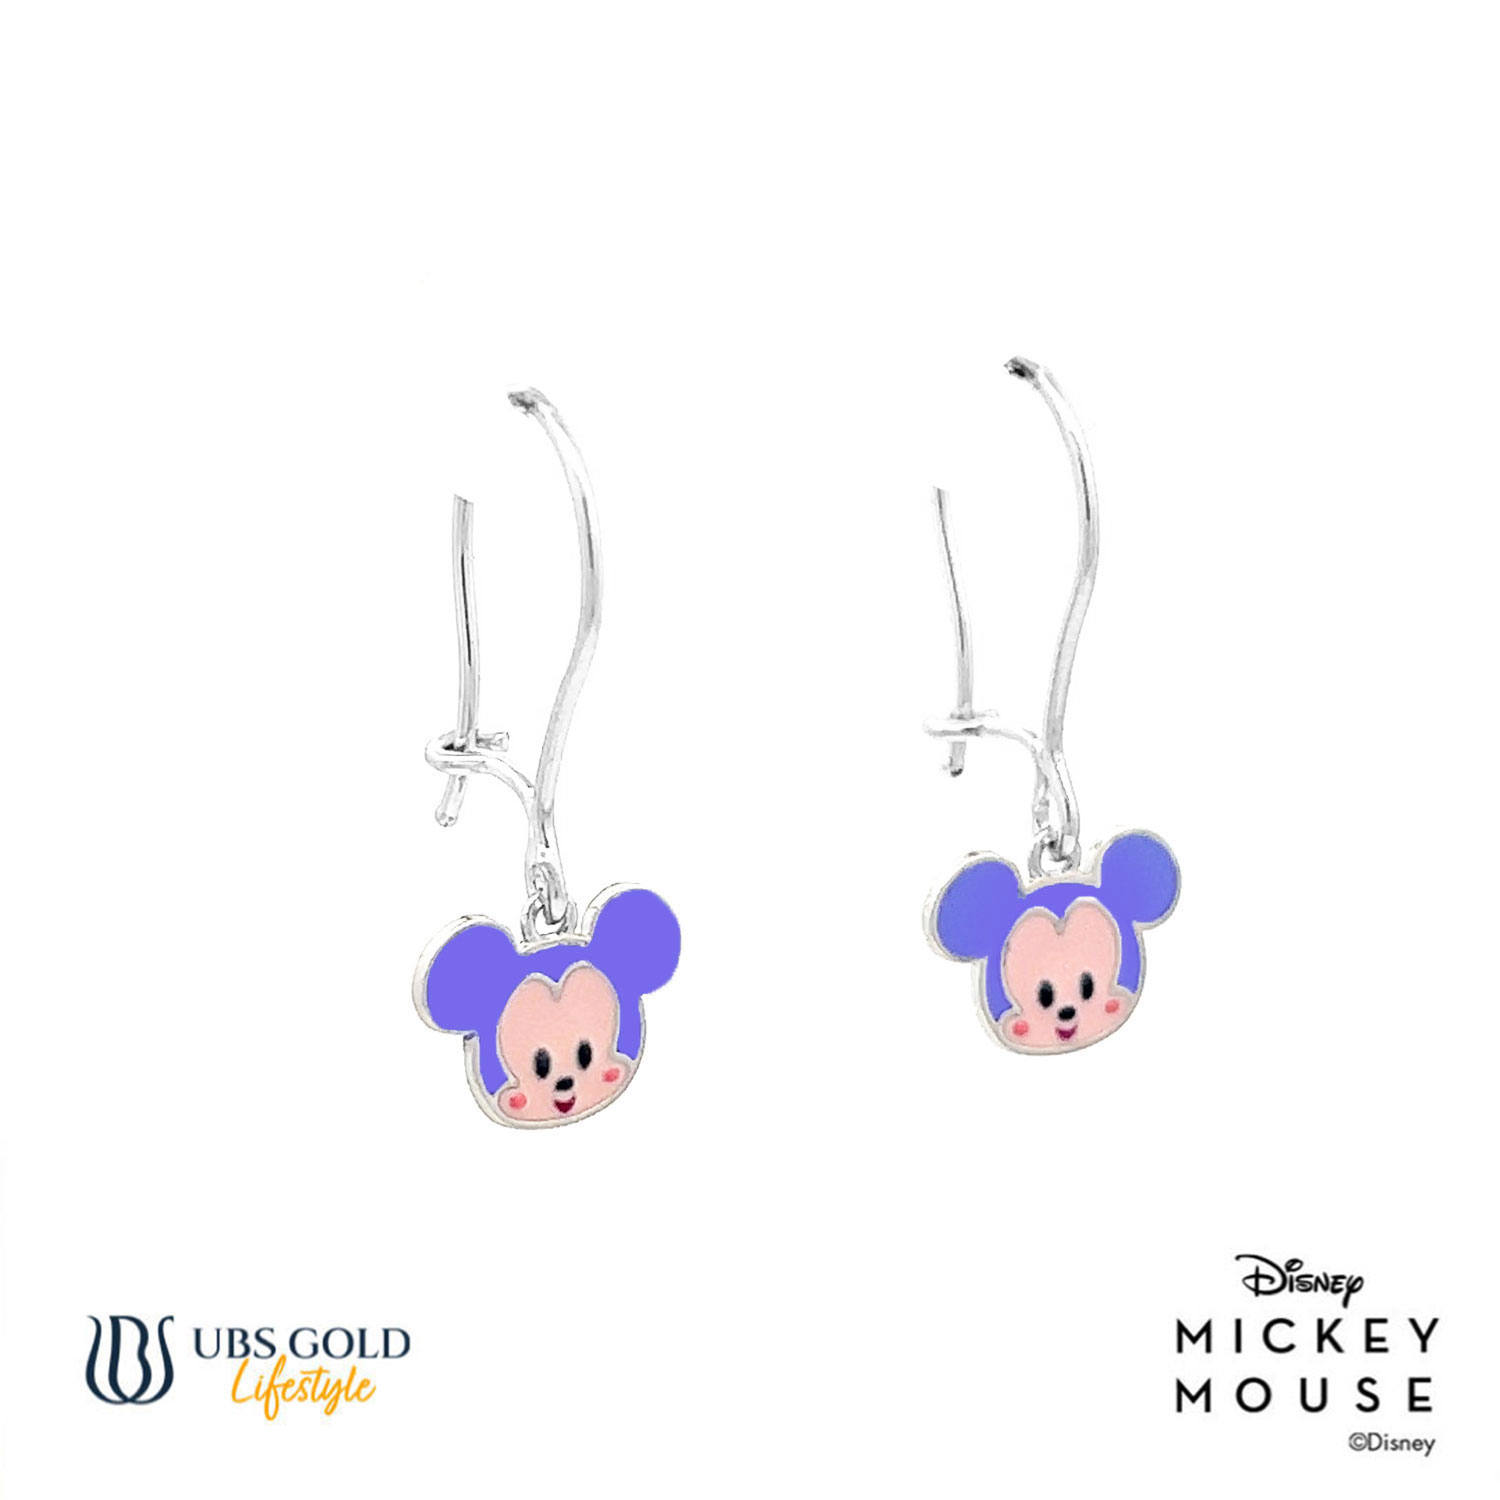 UBS Gold Anting Emas Anak Disney Mickey Mouse - Aay0098 - 17K